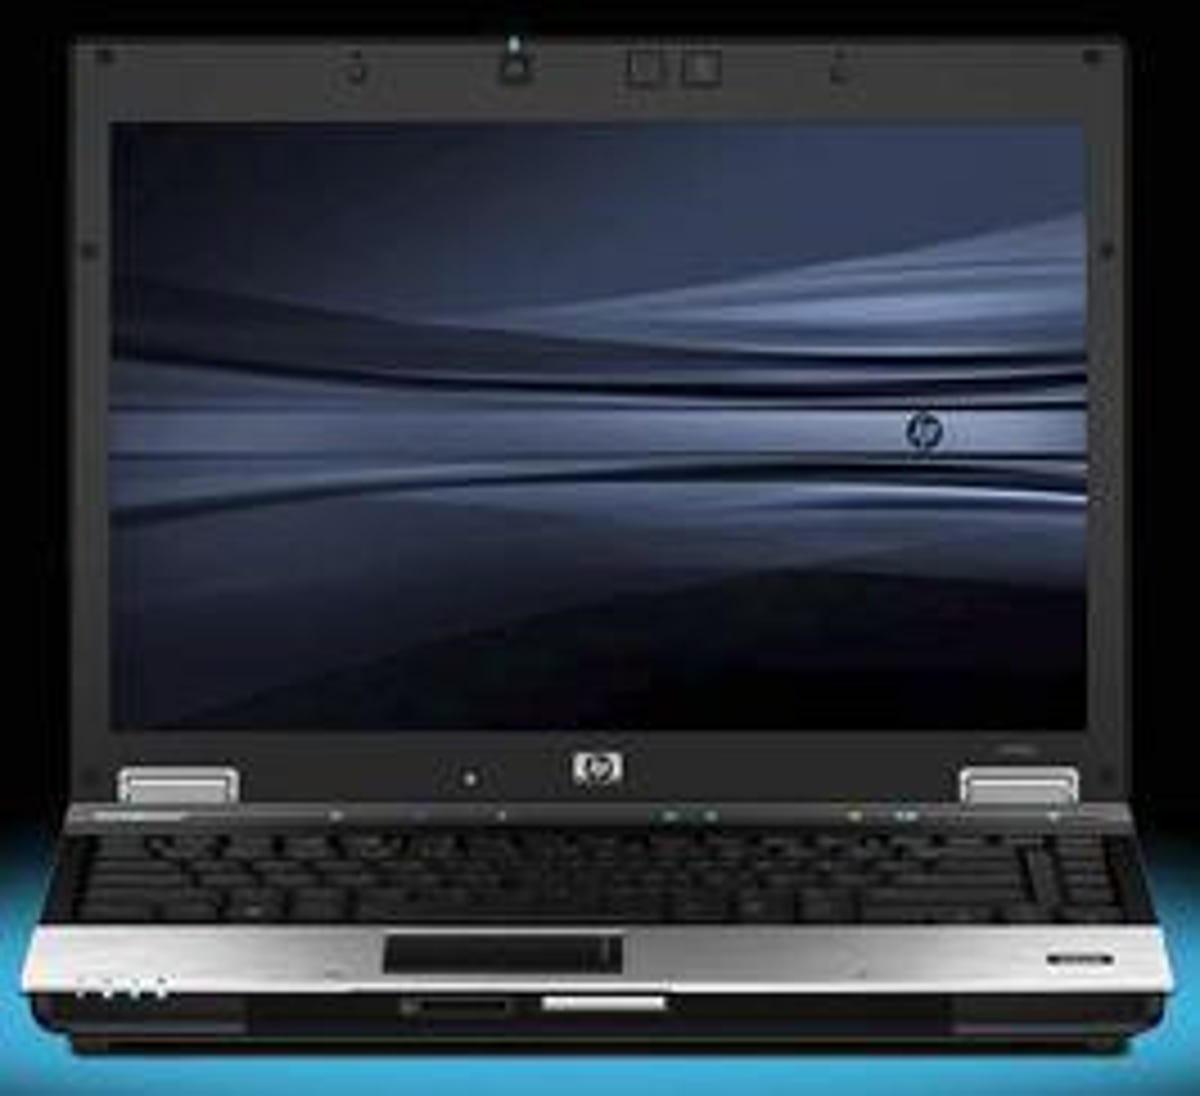 HP's 6930p (photo) and Toshiba's Qosmio G55, among other laptops, are expected to use new Intel mobile processors.